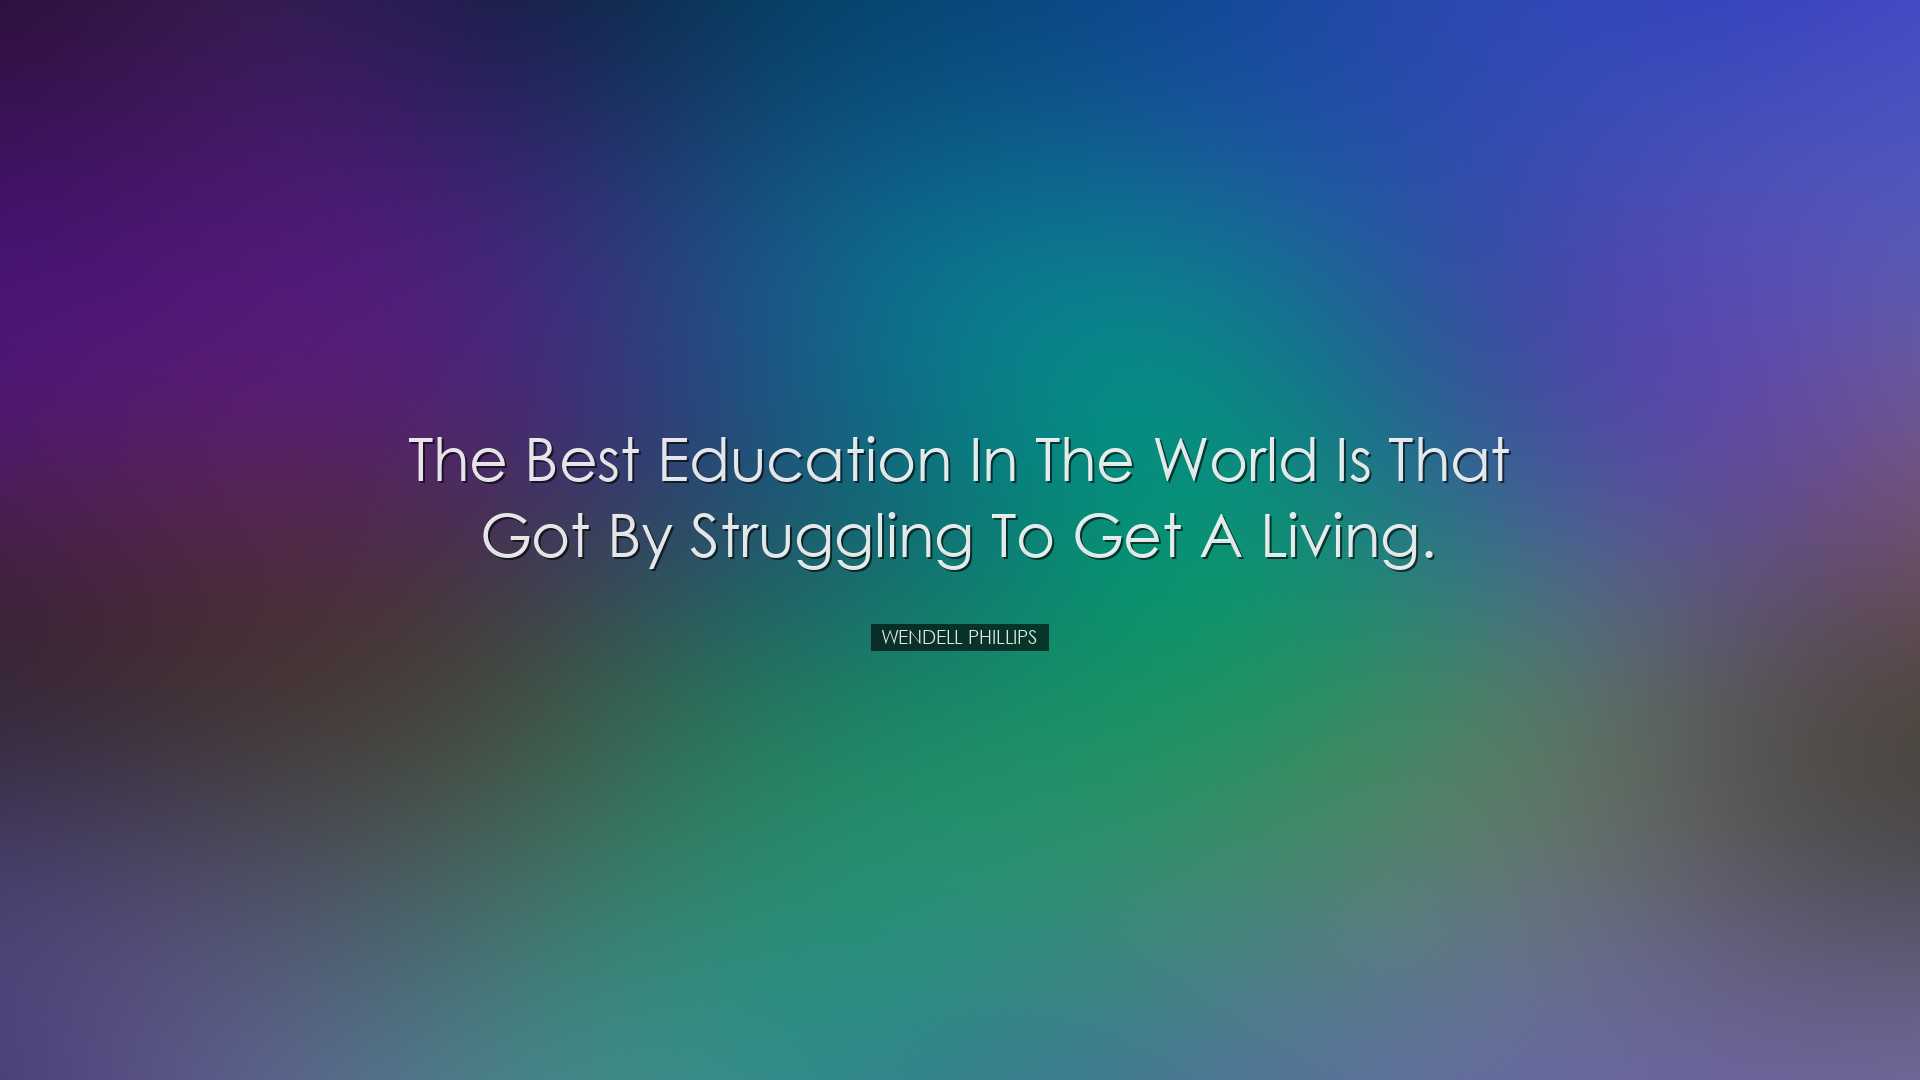 The best education in the world is that got by struggling to get a